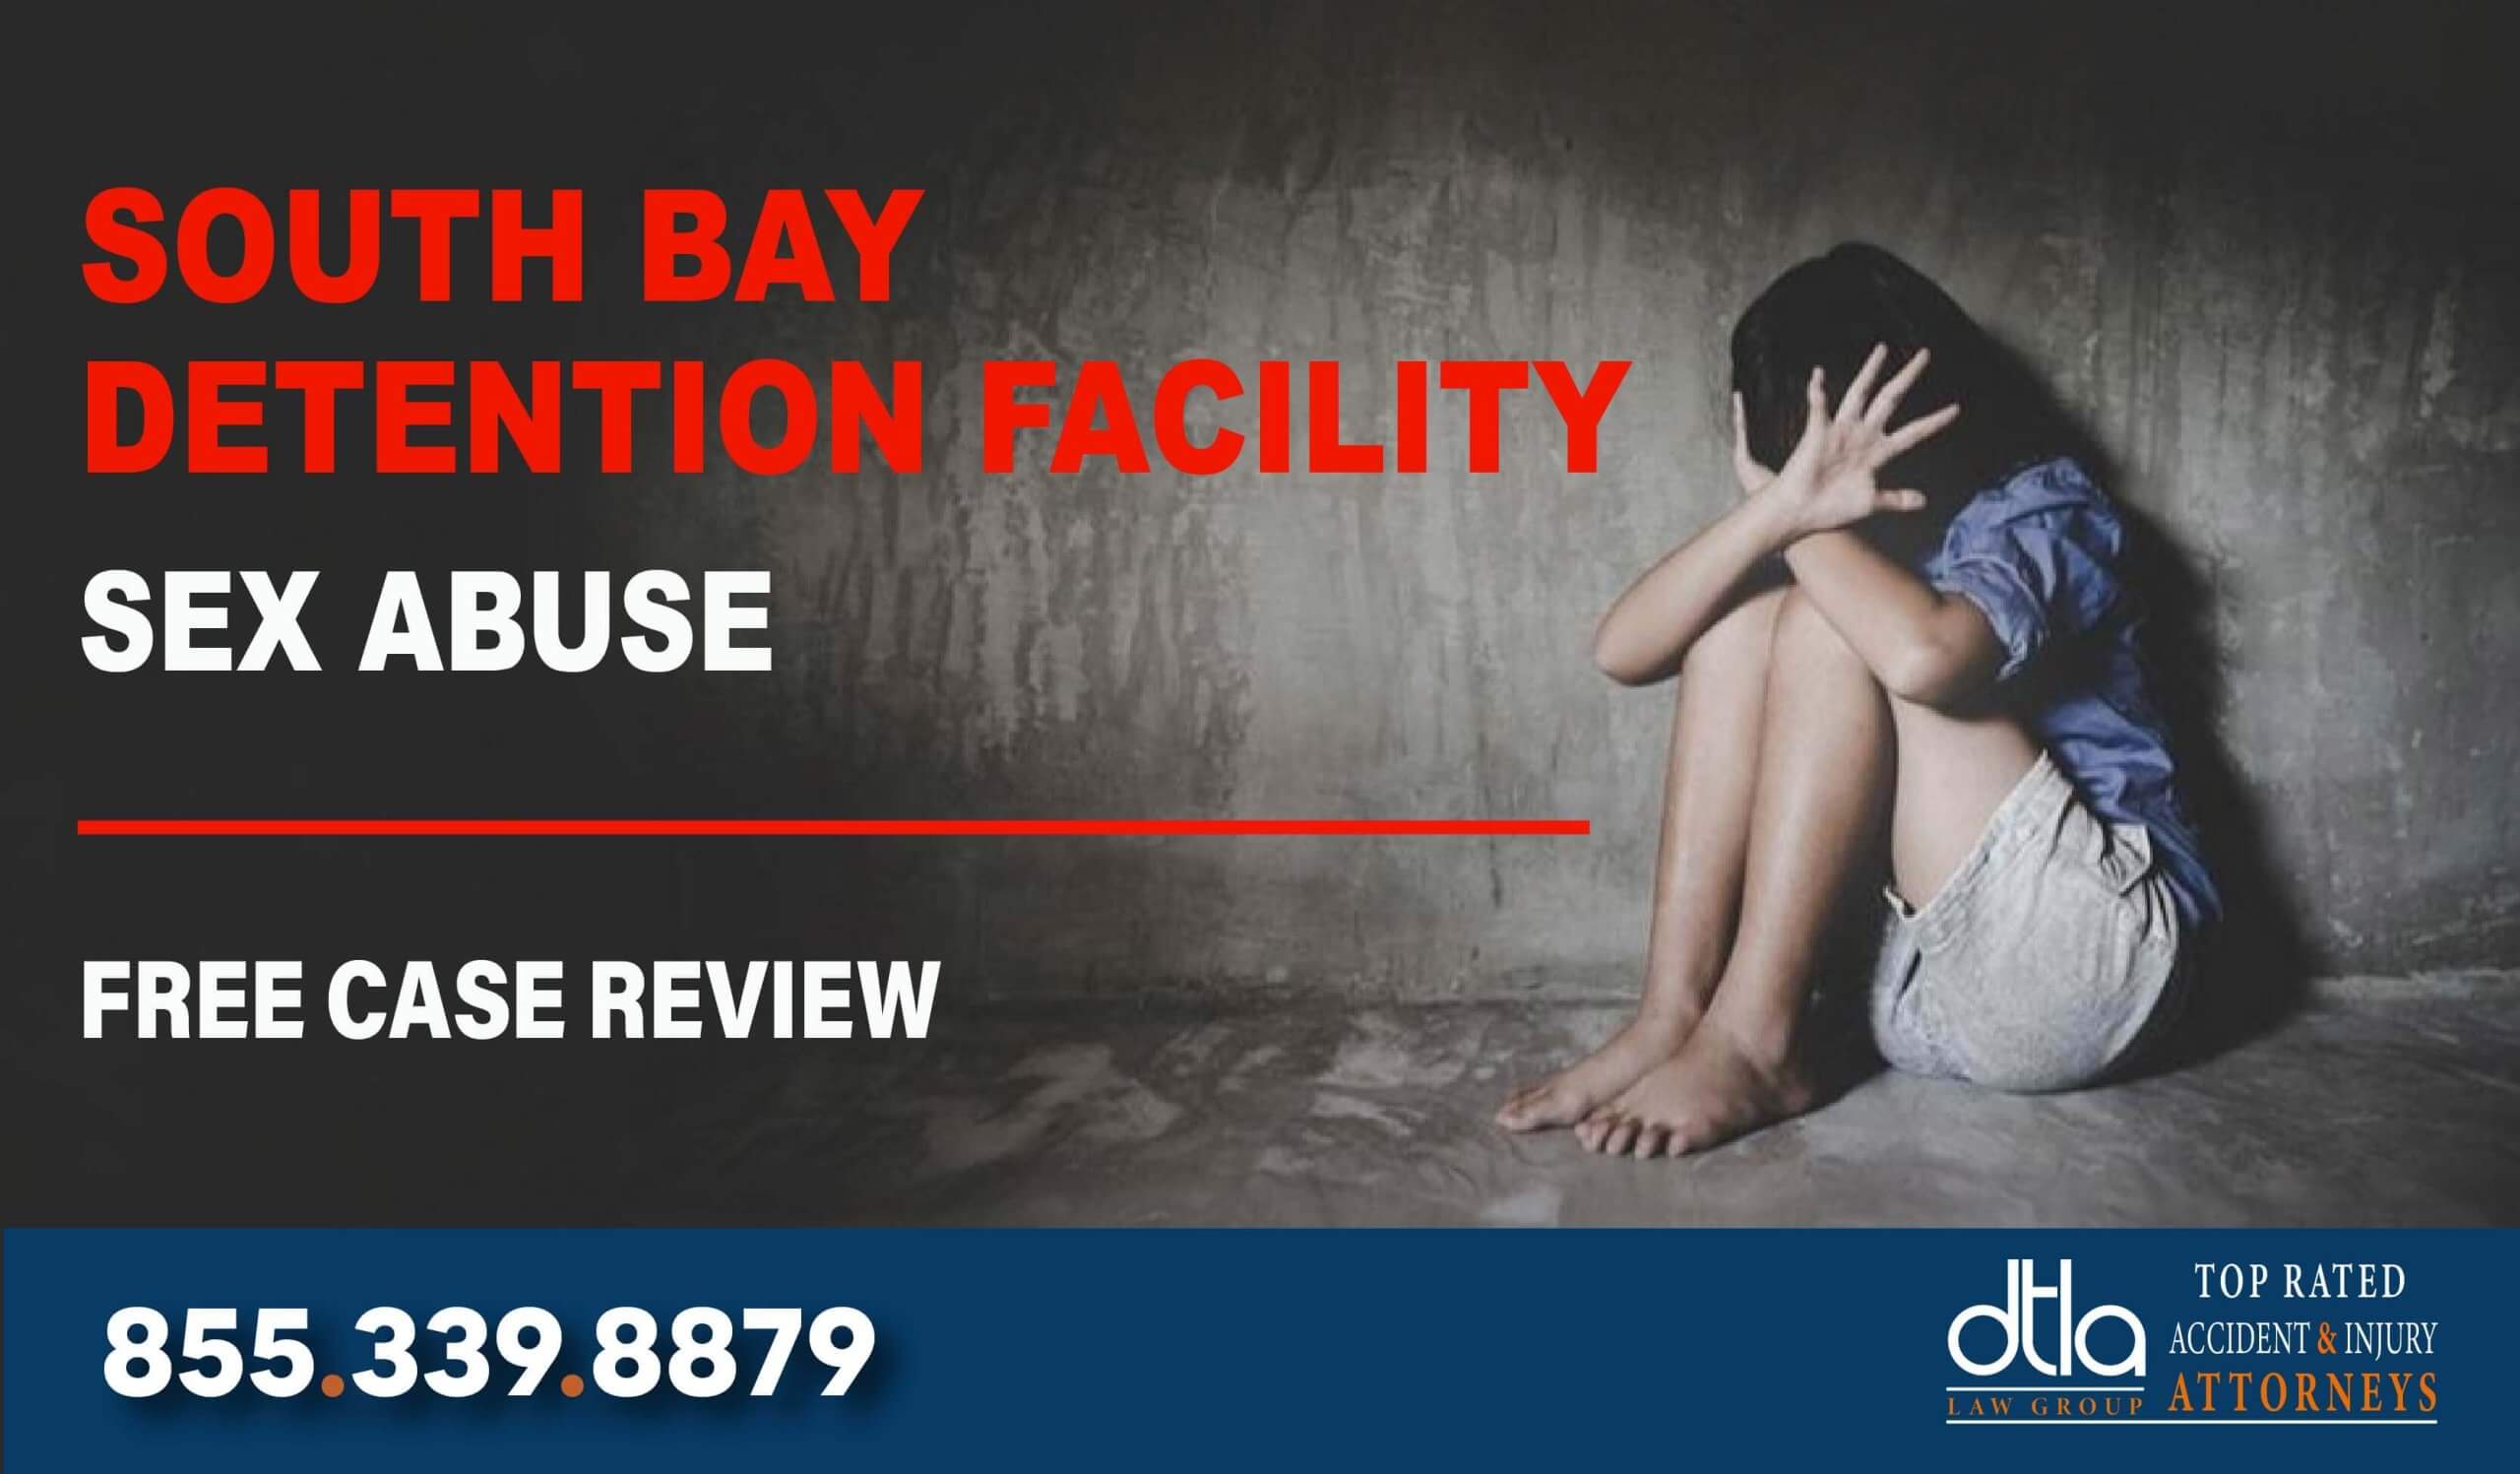 South Bay Detention Facility Sexual Abuse Lawyers lawyer sue compensation incident liability